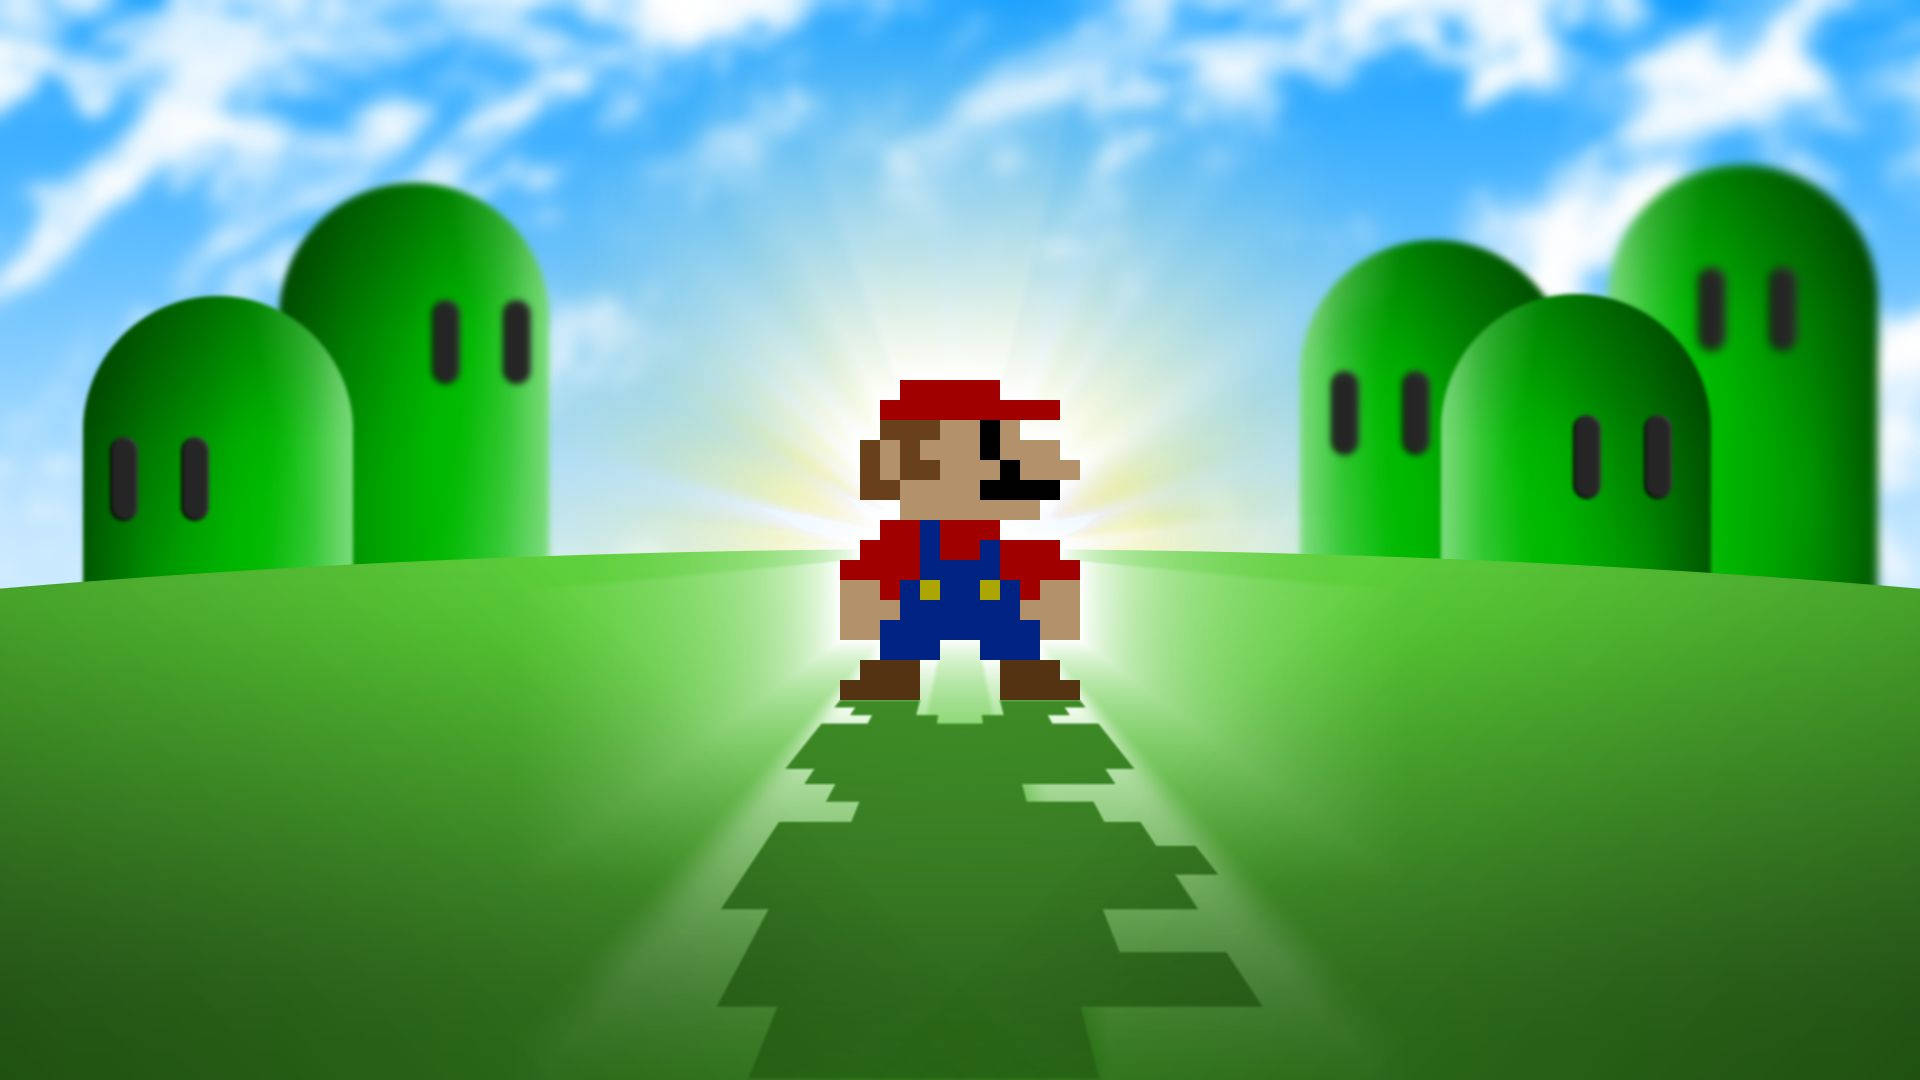 The Iconic Mario, Jumping as Always Wallpaper